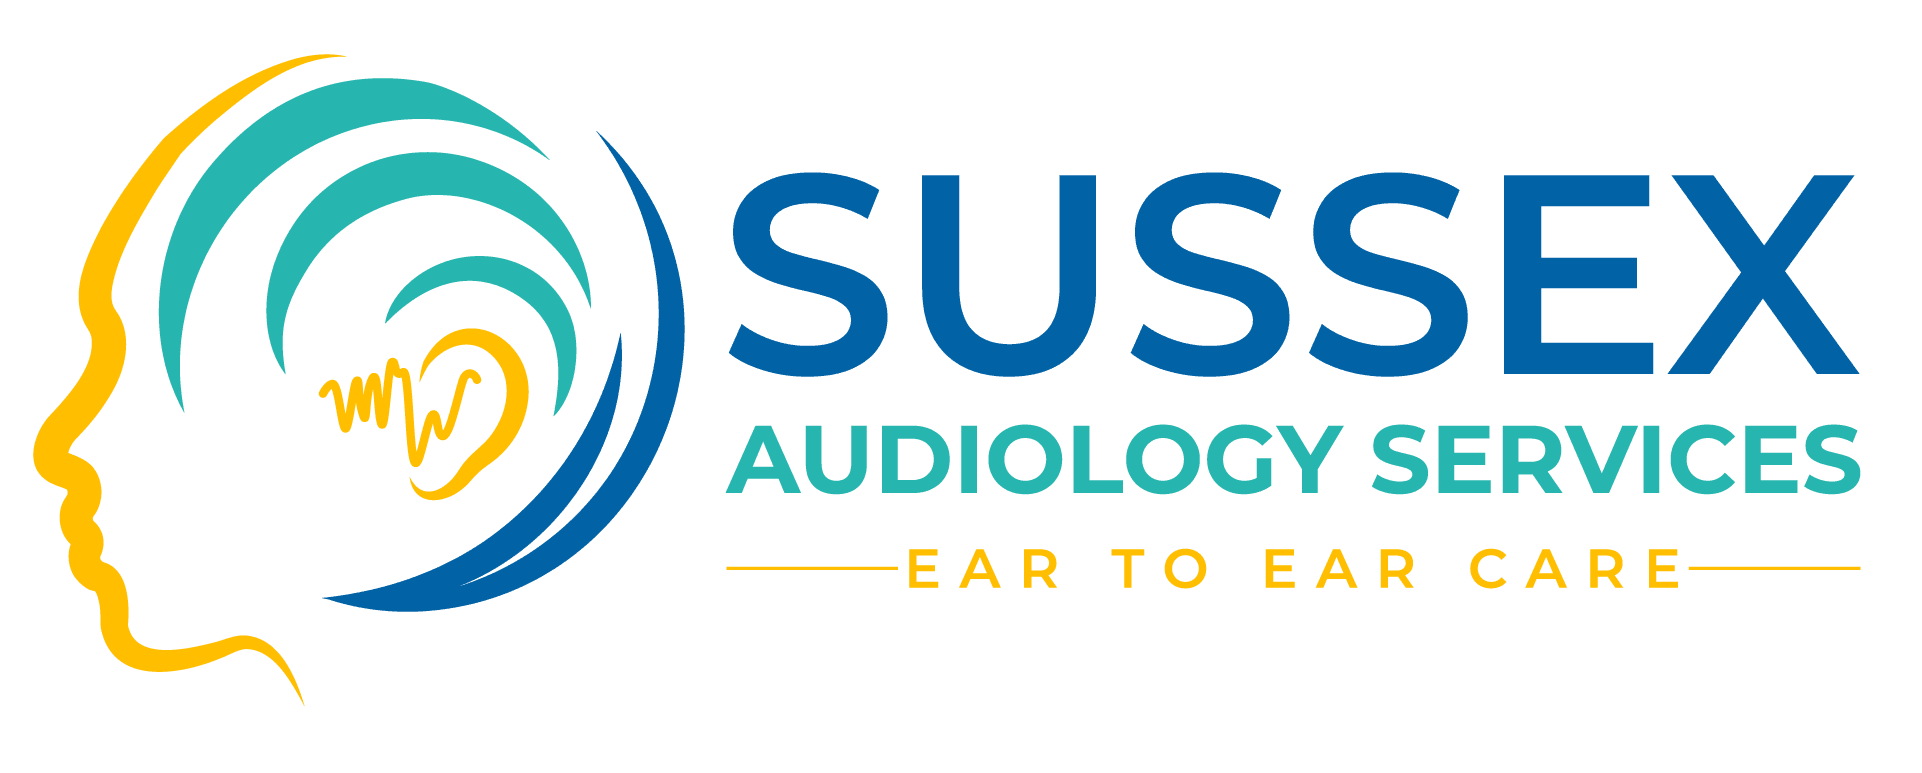 Sussex Audiology